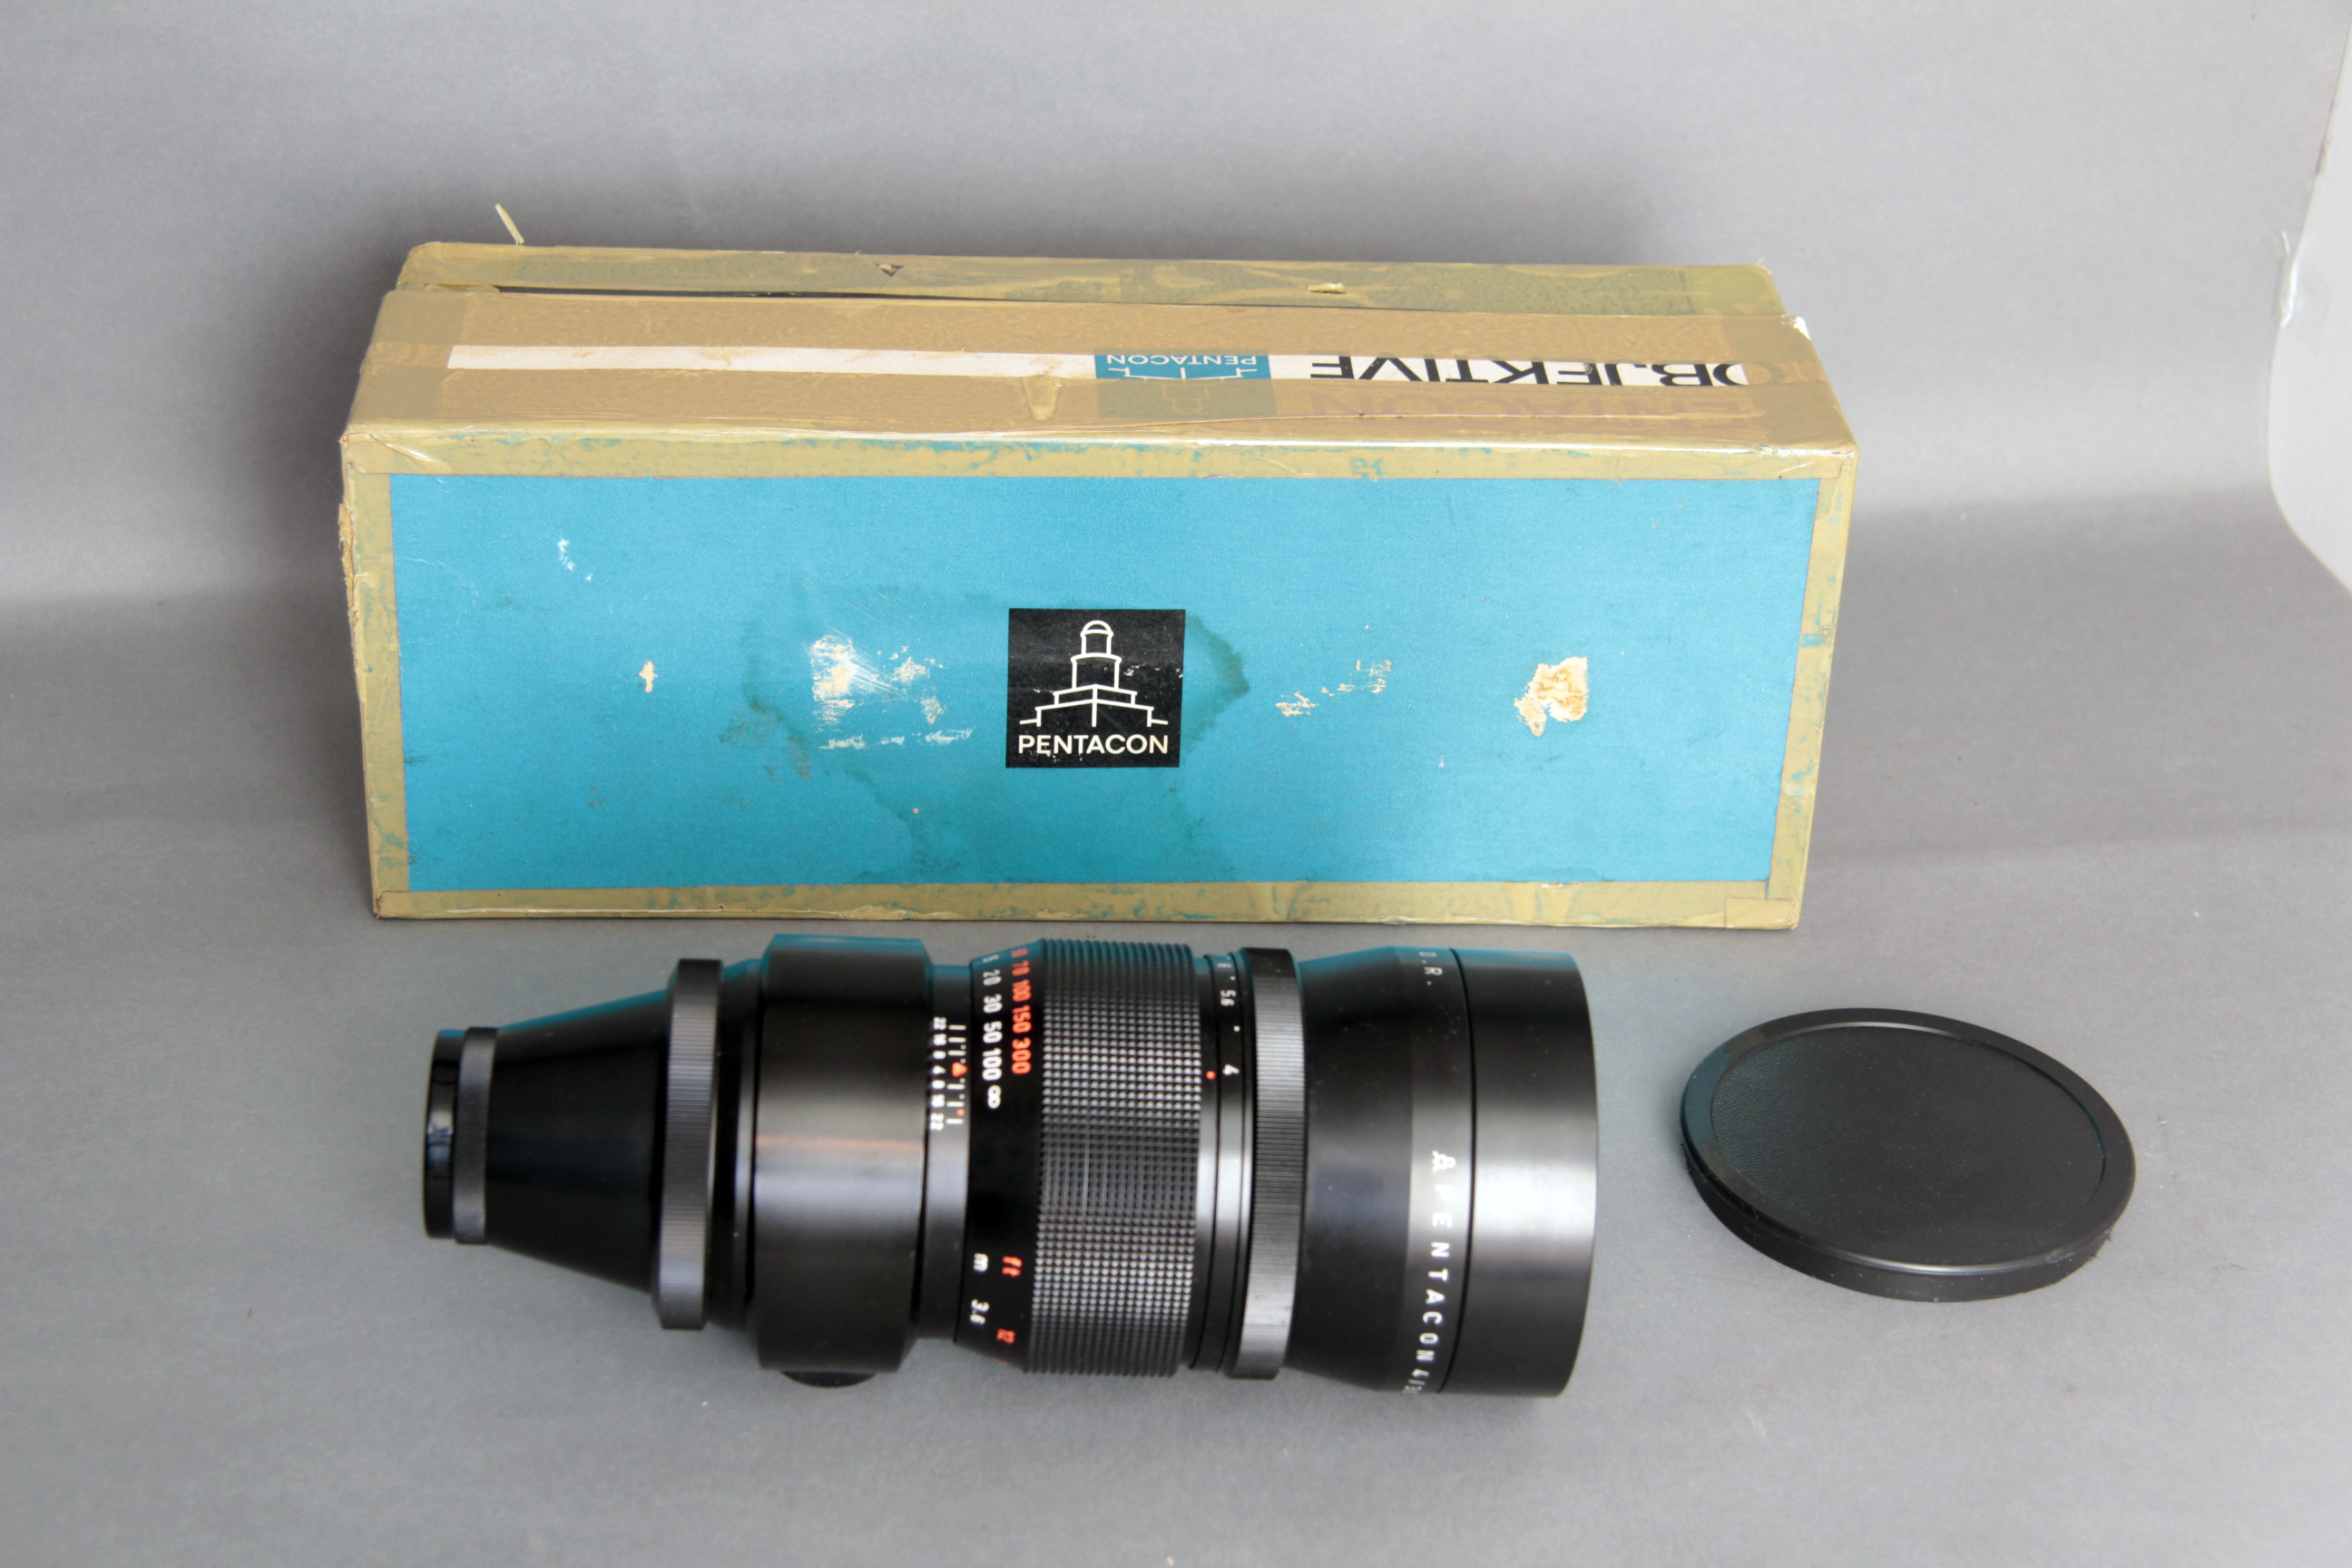 Pentacon 300mm Lens, f/4 aperture, slight fungus, with M42 adaptor in makers box